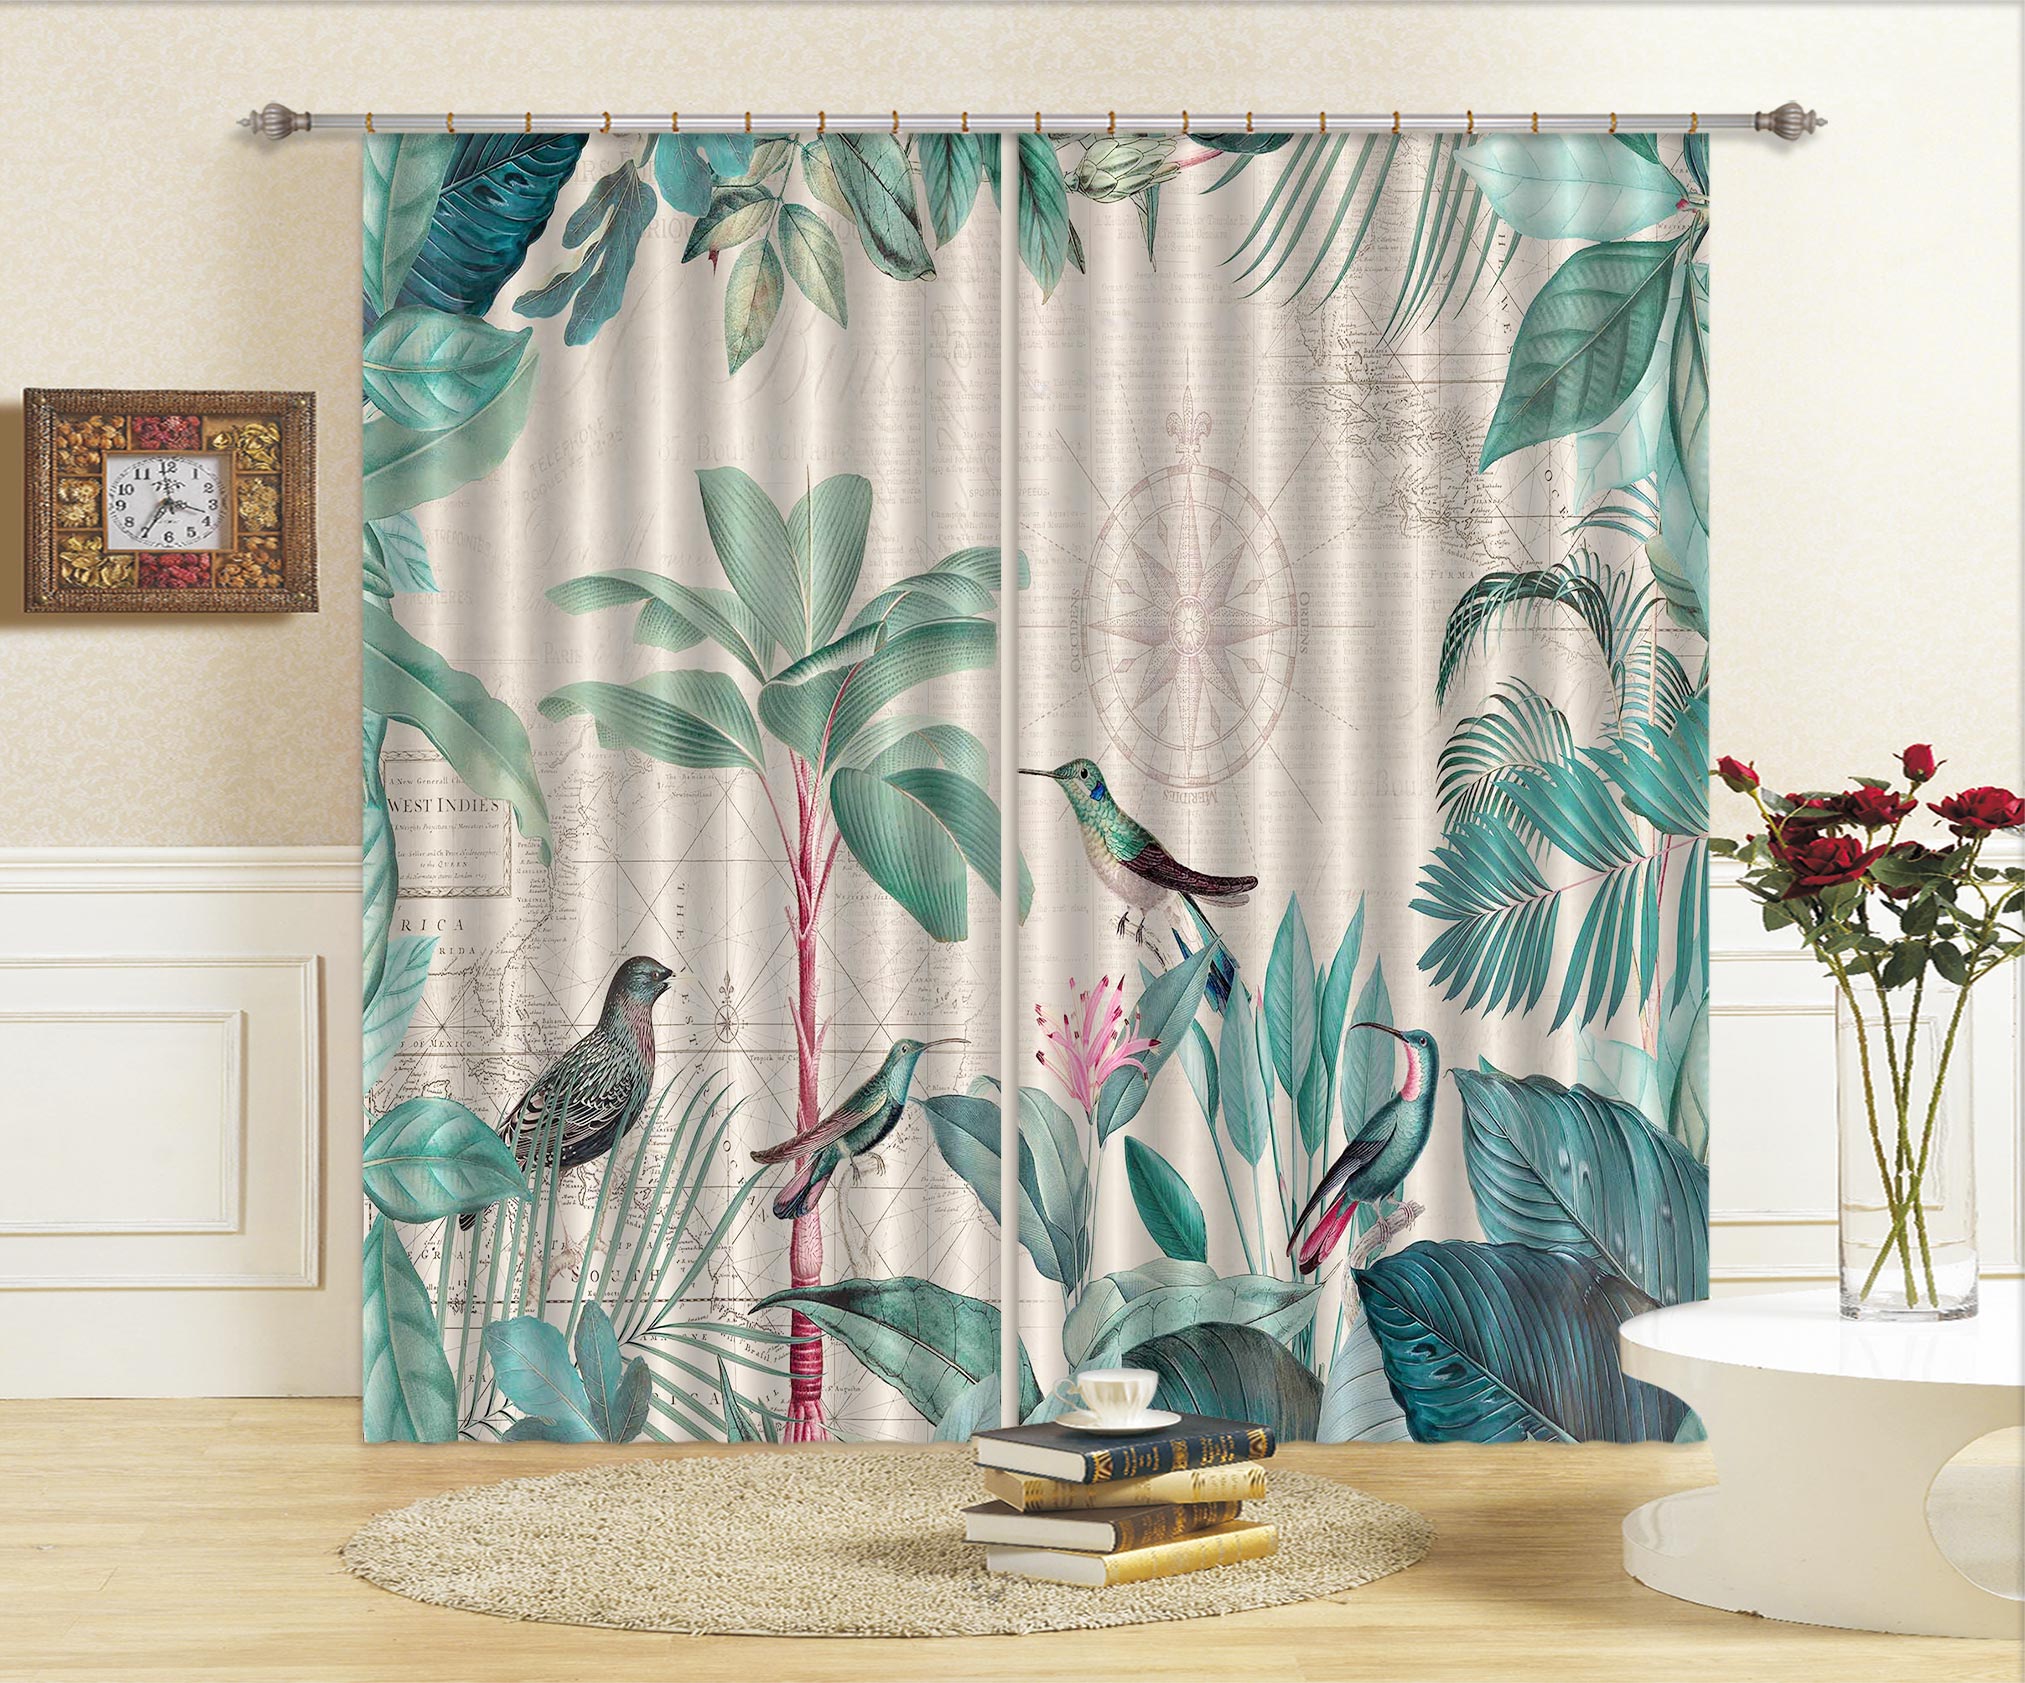 3D Palm Forest 021 Andrea haase Curtain Curtains Drapes